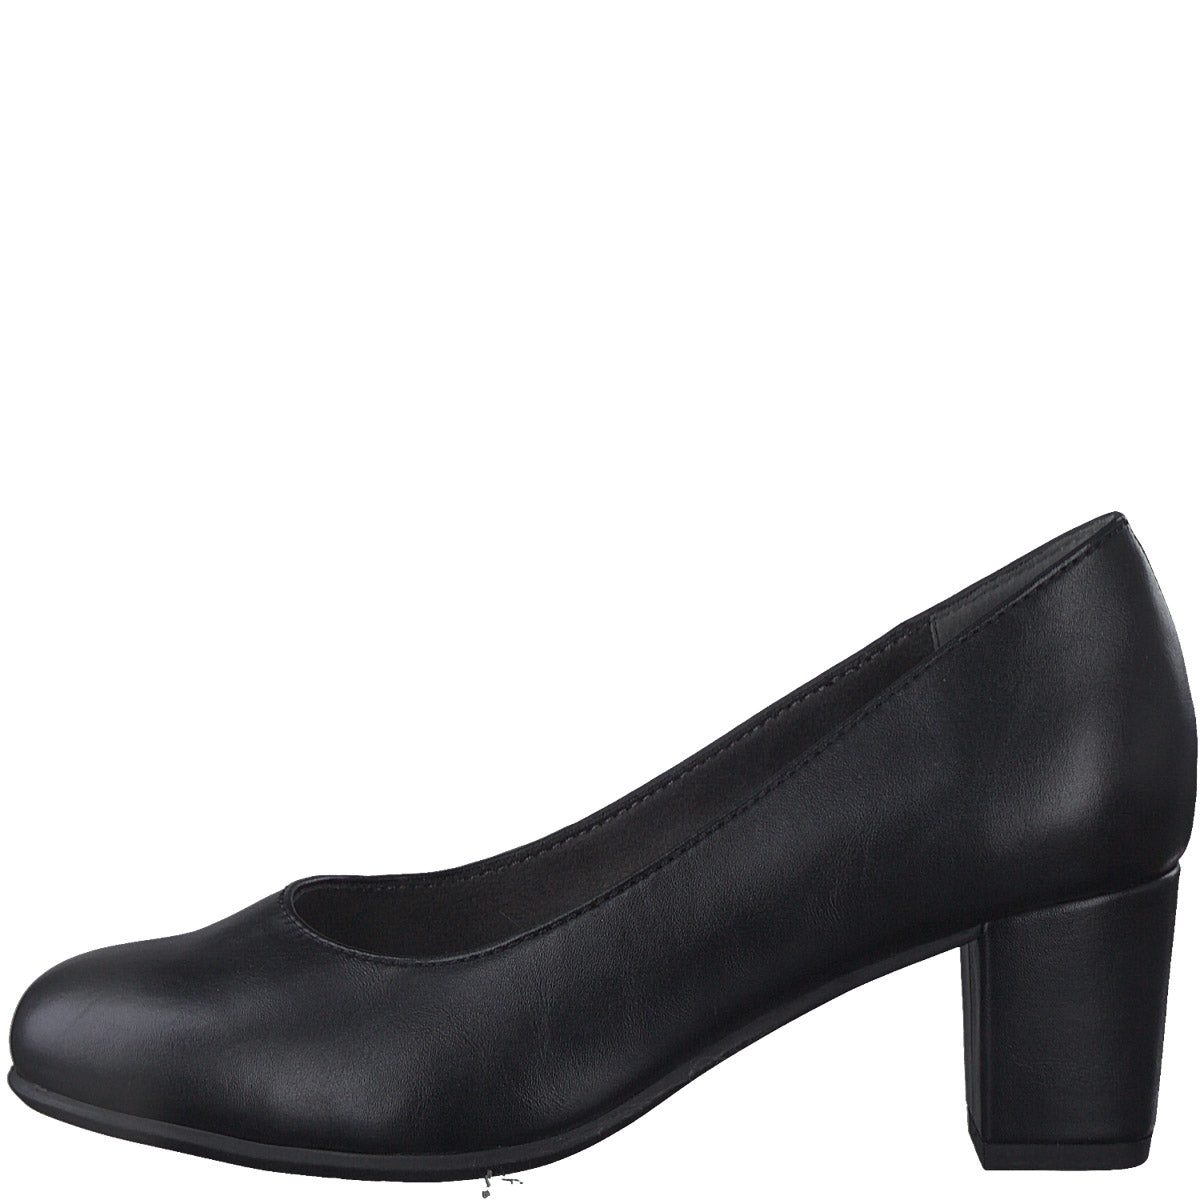 Classic Black Faux Leather Heel